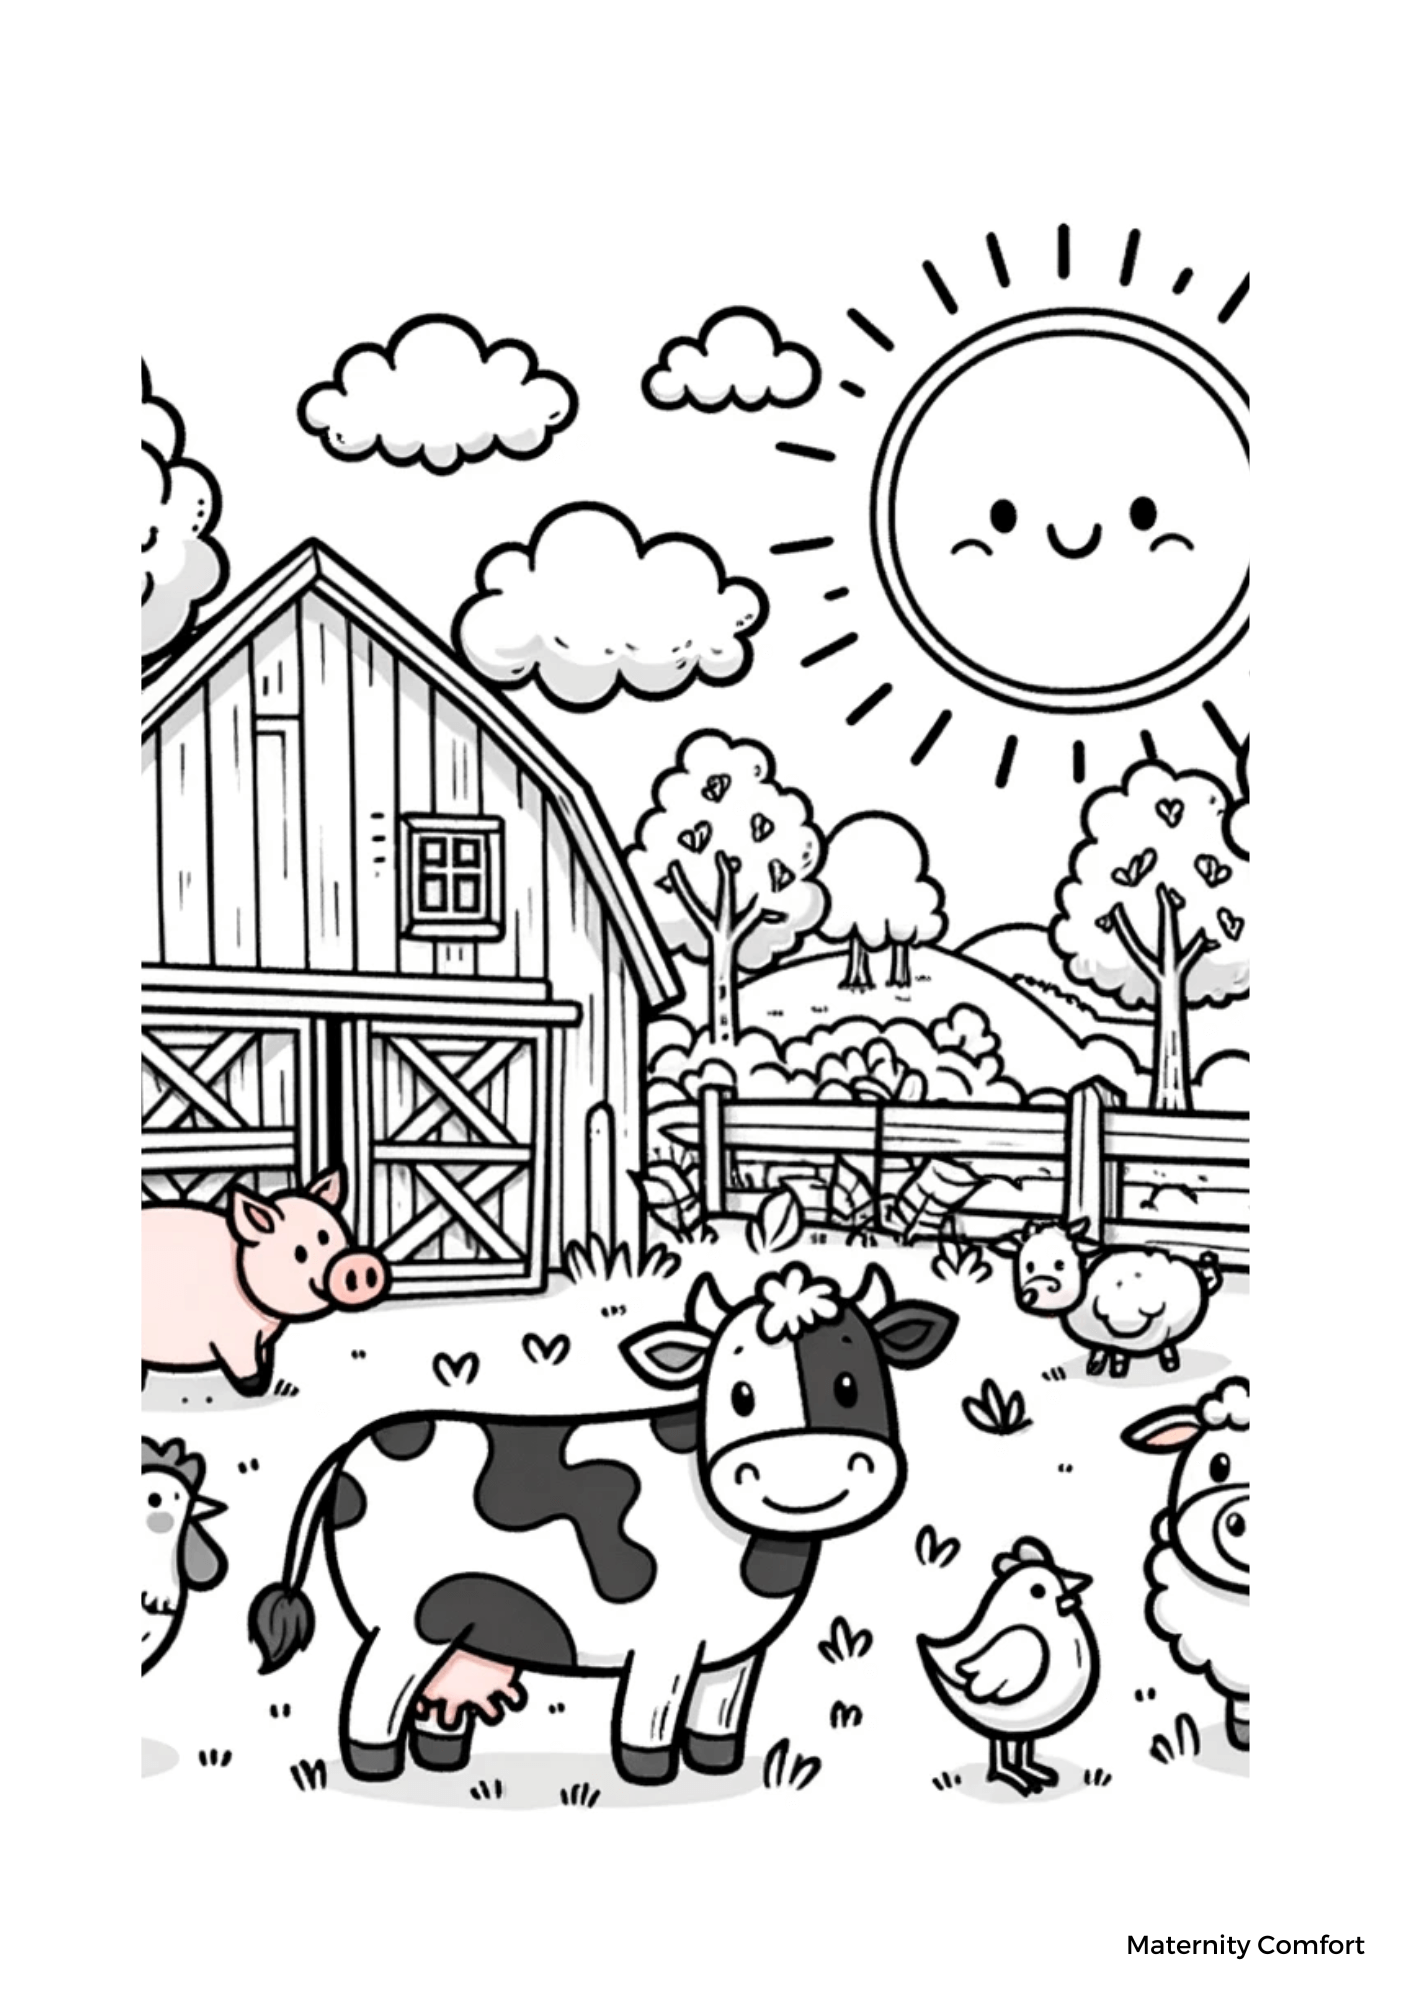 7 Delightful Farm Animal Coloring Pages For Kids